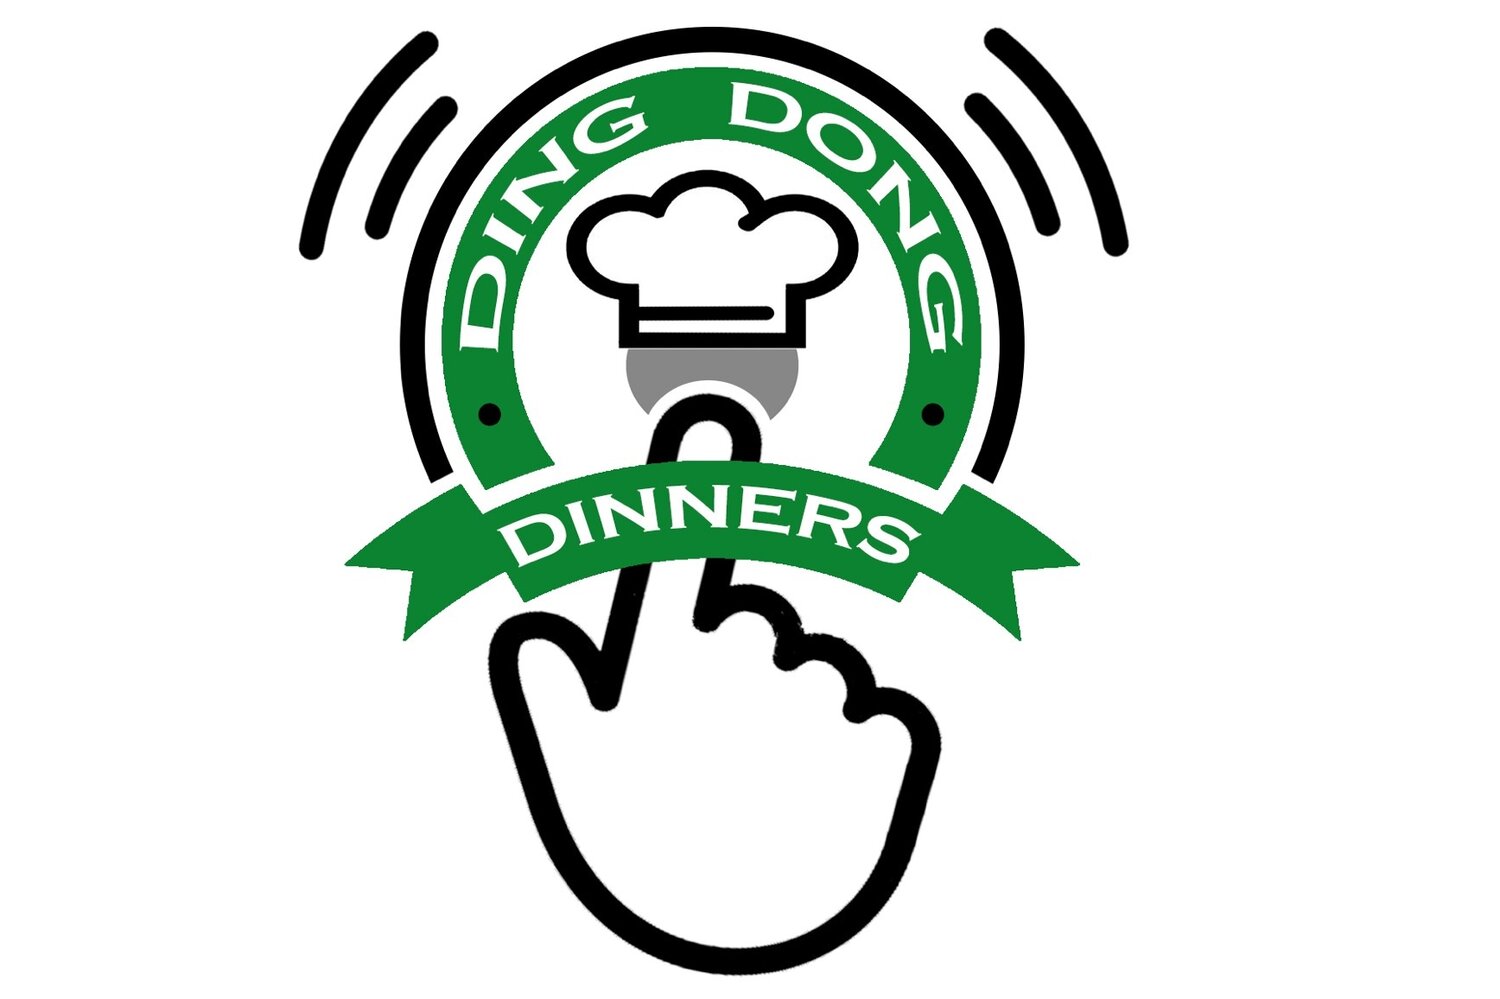 Ding Dong Dinners